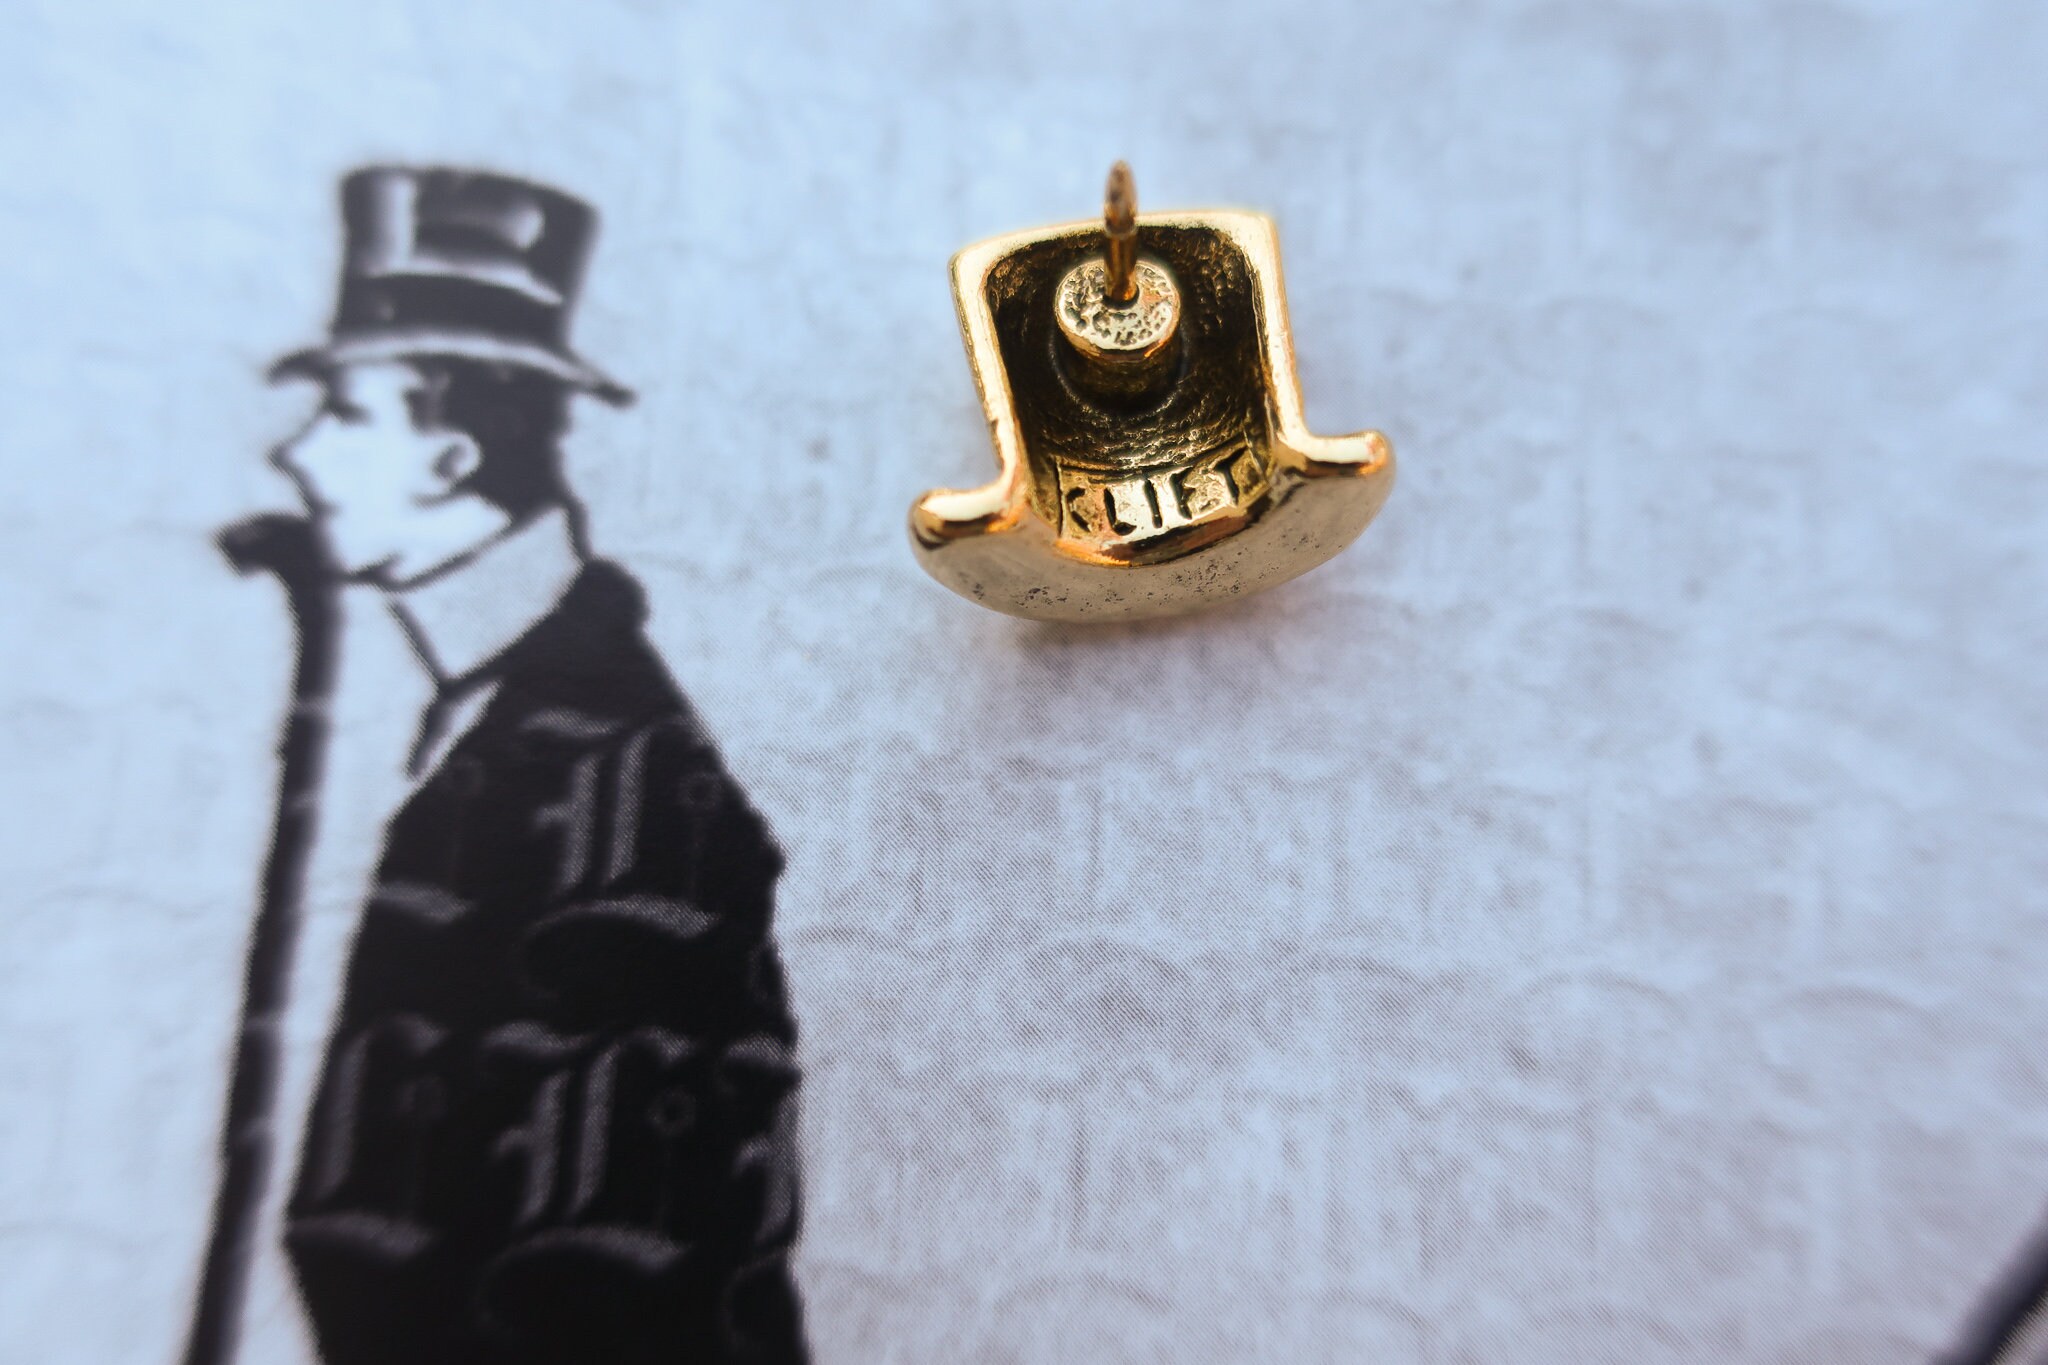 JimClift Top Hat Gold Dipped Pewter Lapel Pin- CC475G- Hats, Formal Wear, Gentleman, Gala, and Top Hat Pins